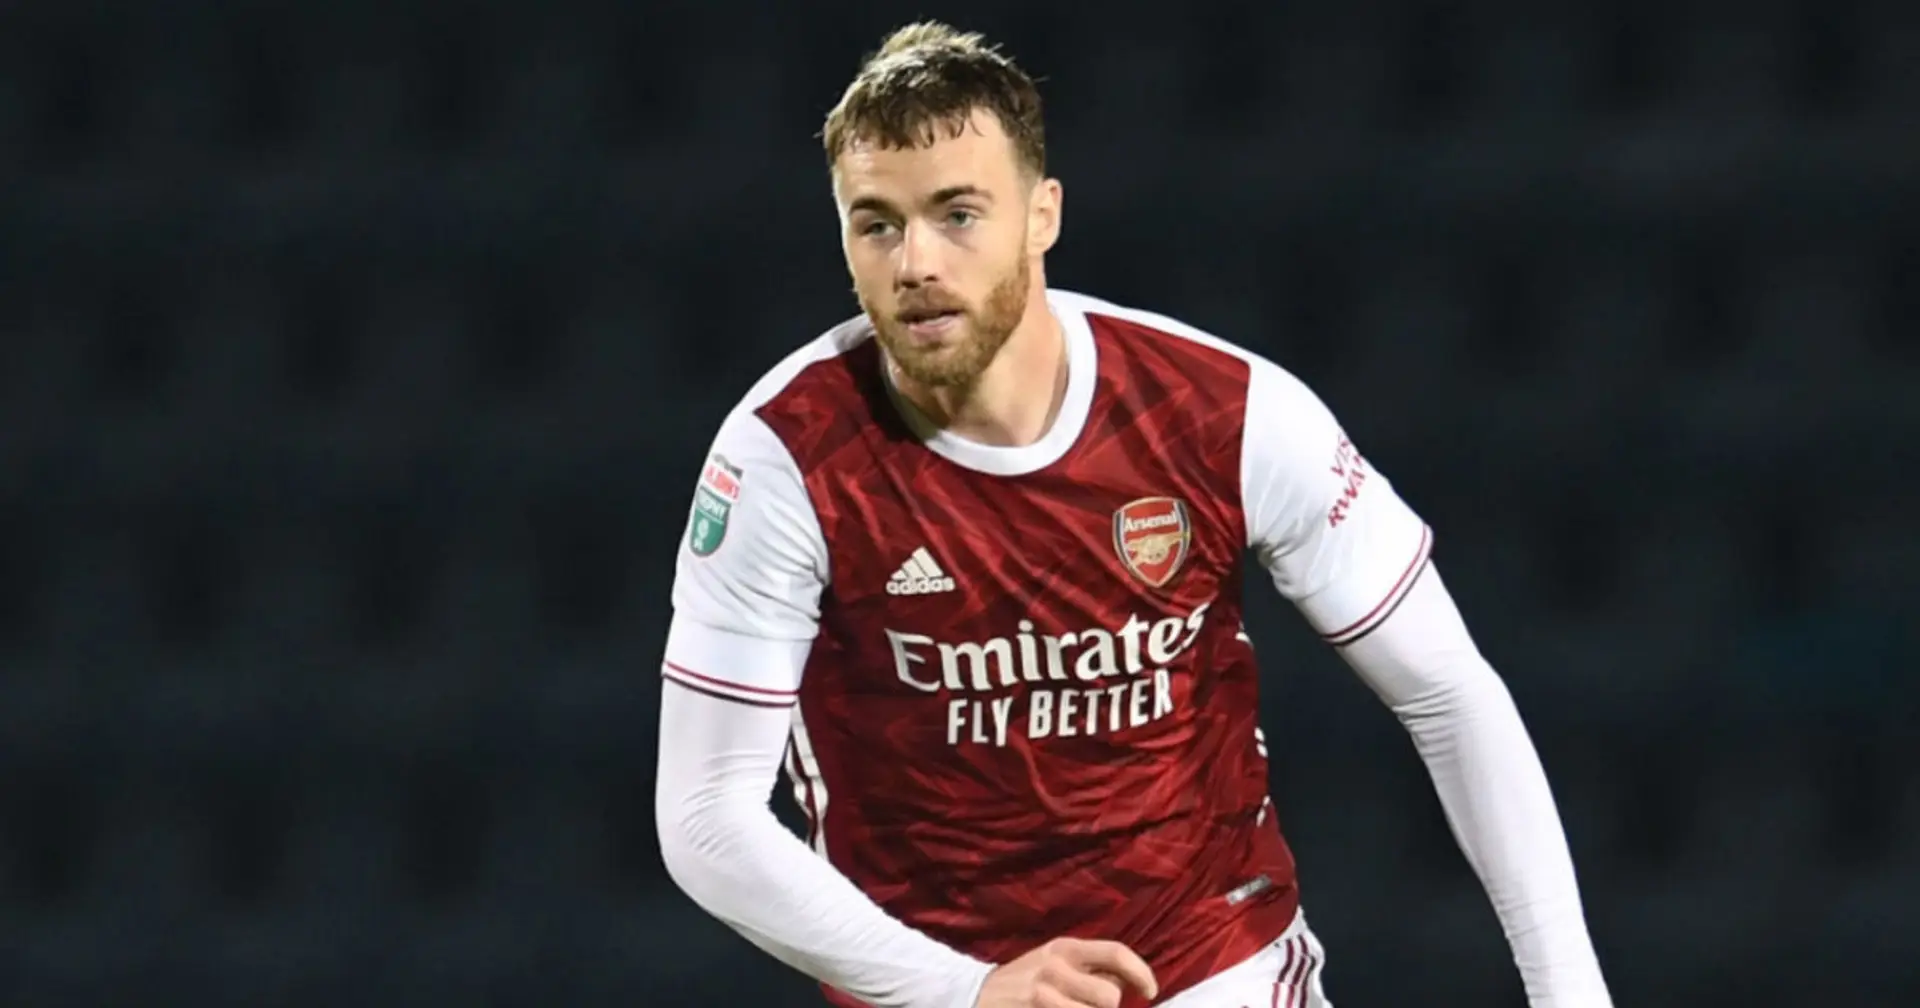 Chambers plays first game after injury, Saliba, Smith Rowe feature too as Arsenal U21 beat Gillingham (video)